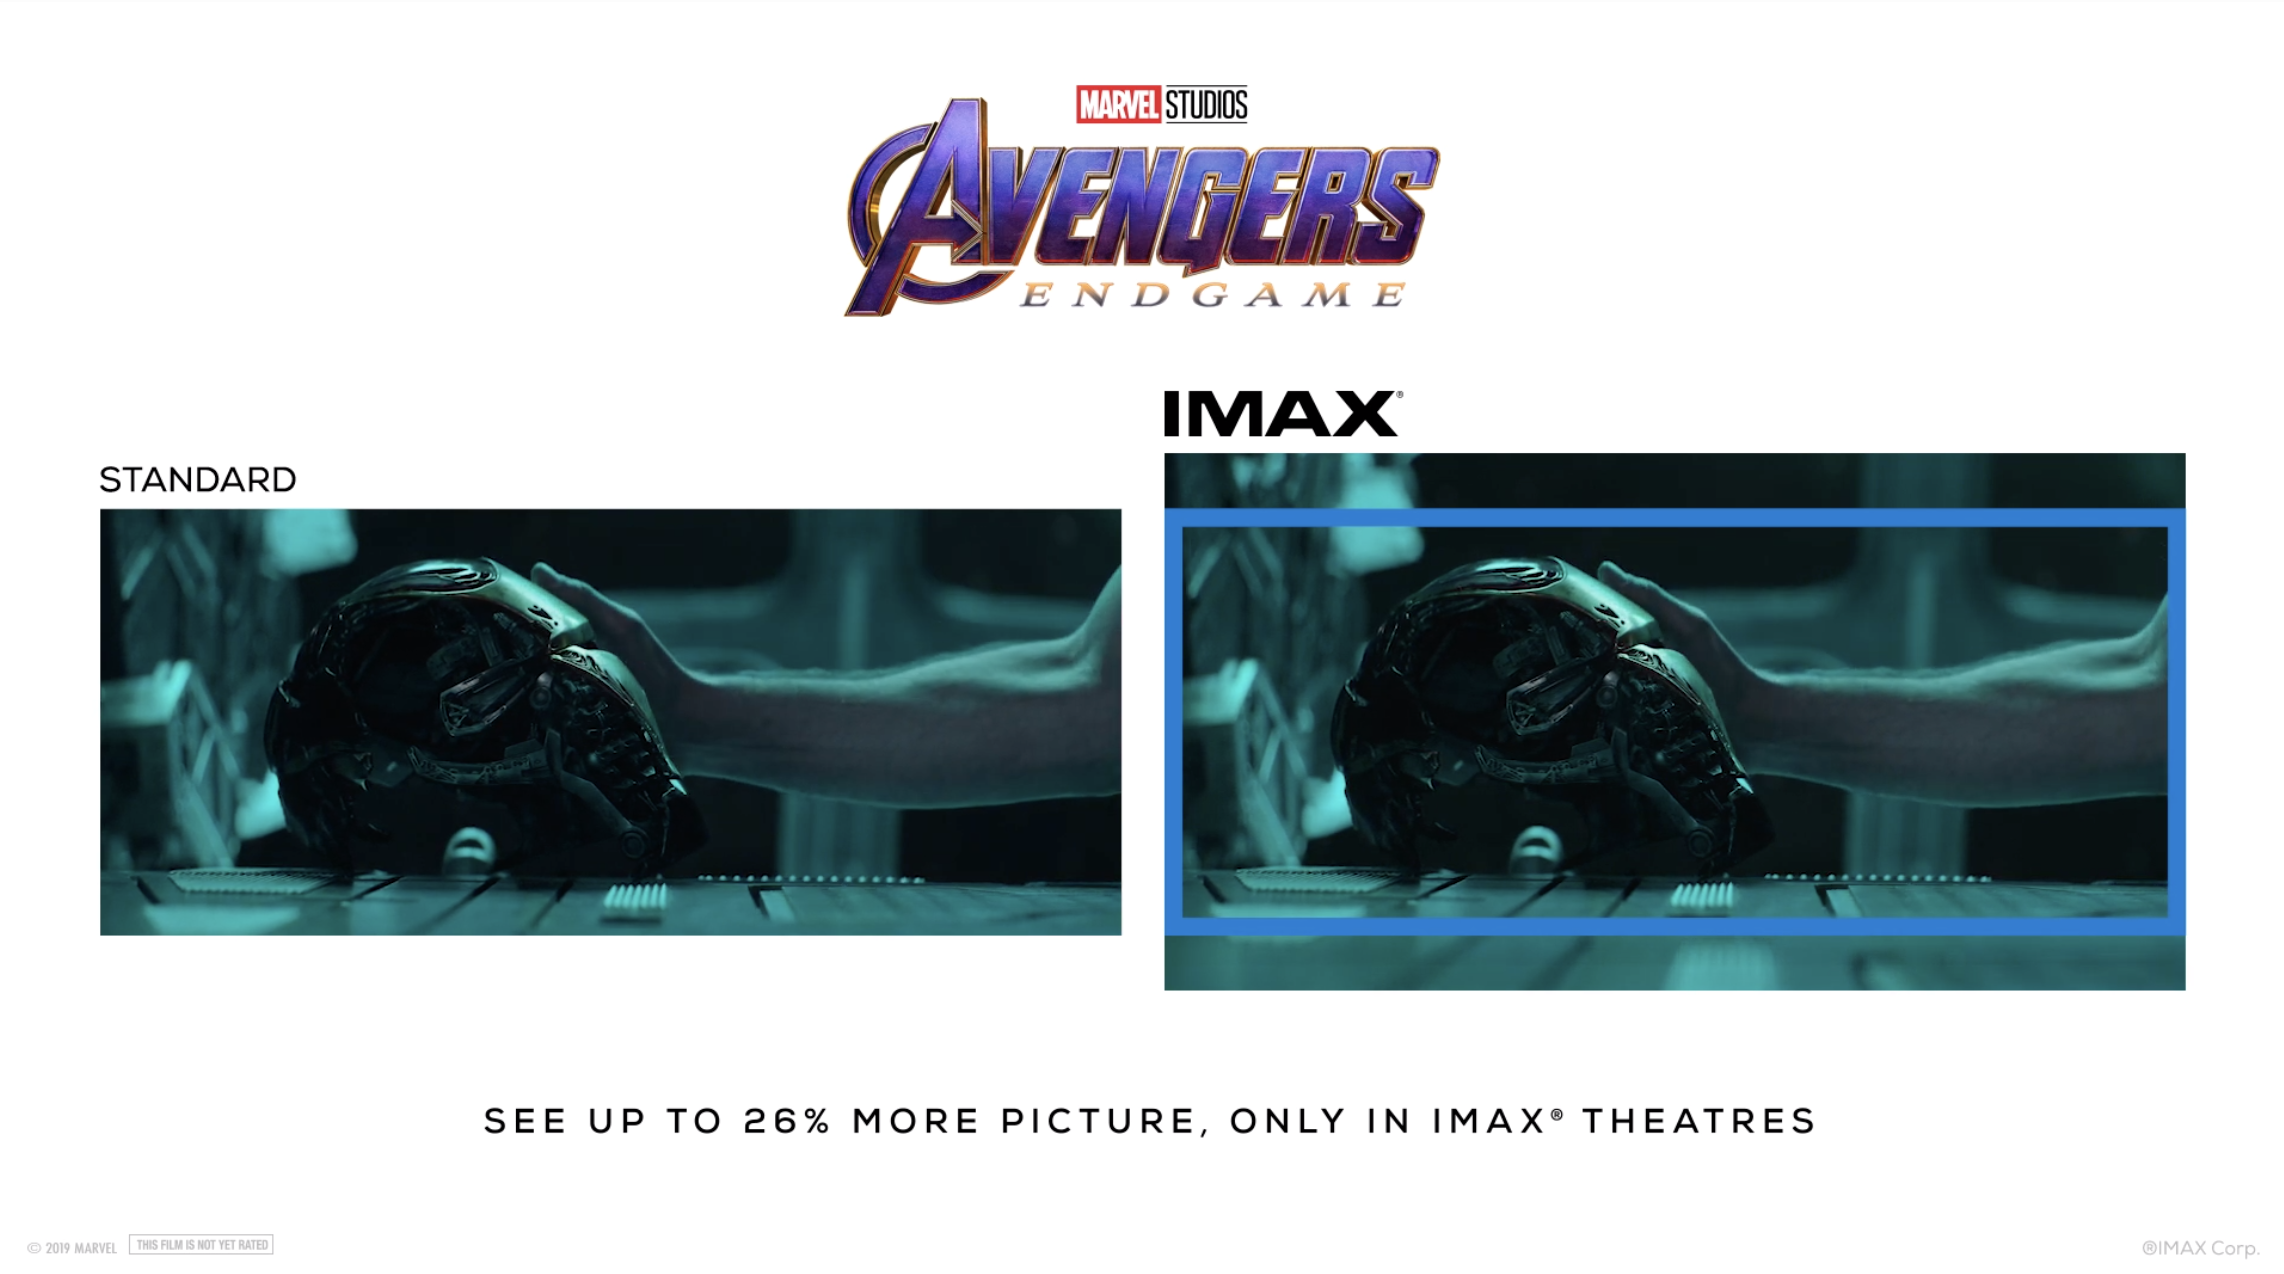 See The Avengers: Endgame IMAX Trailer Side By Side With The Original Trailer